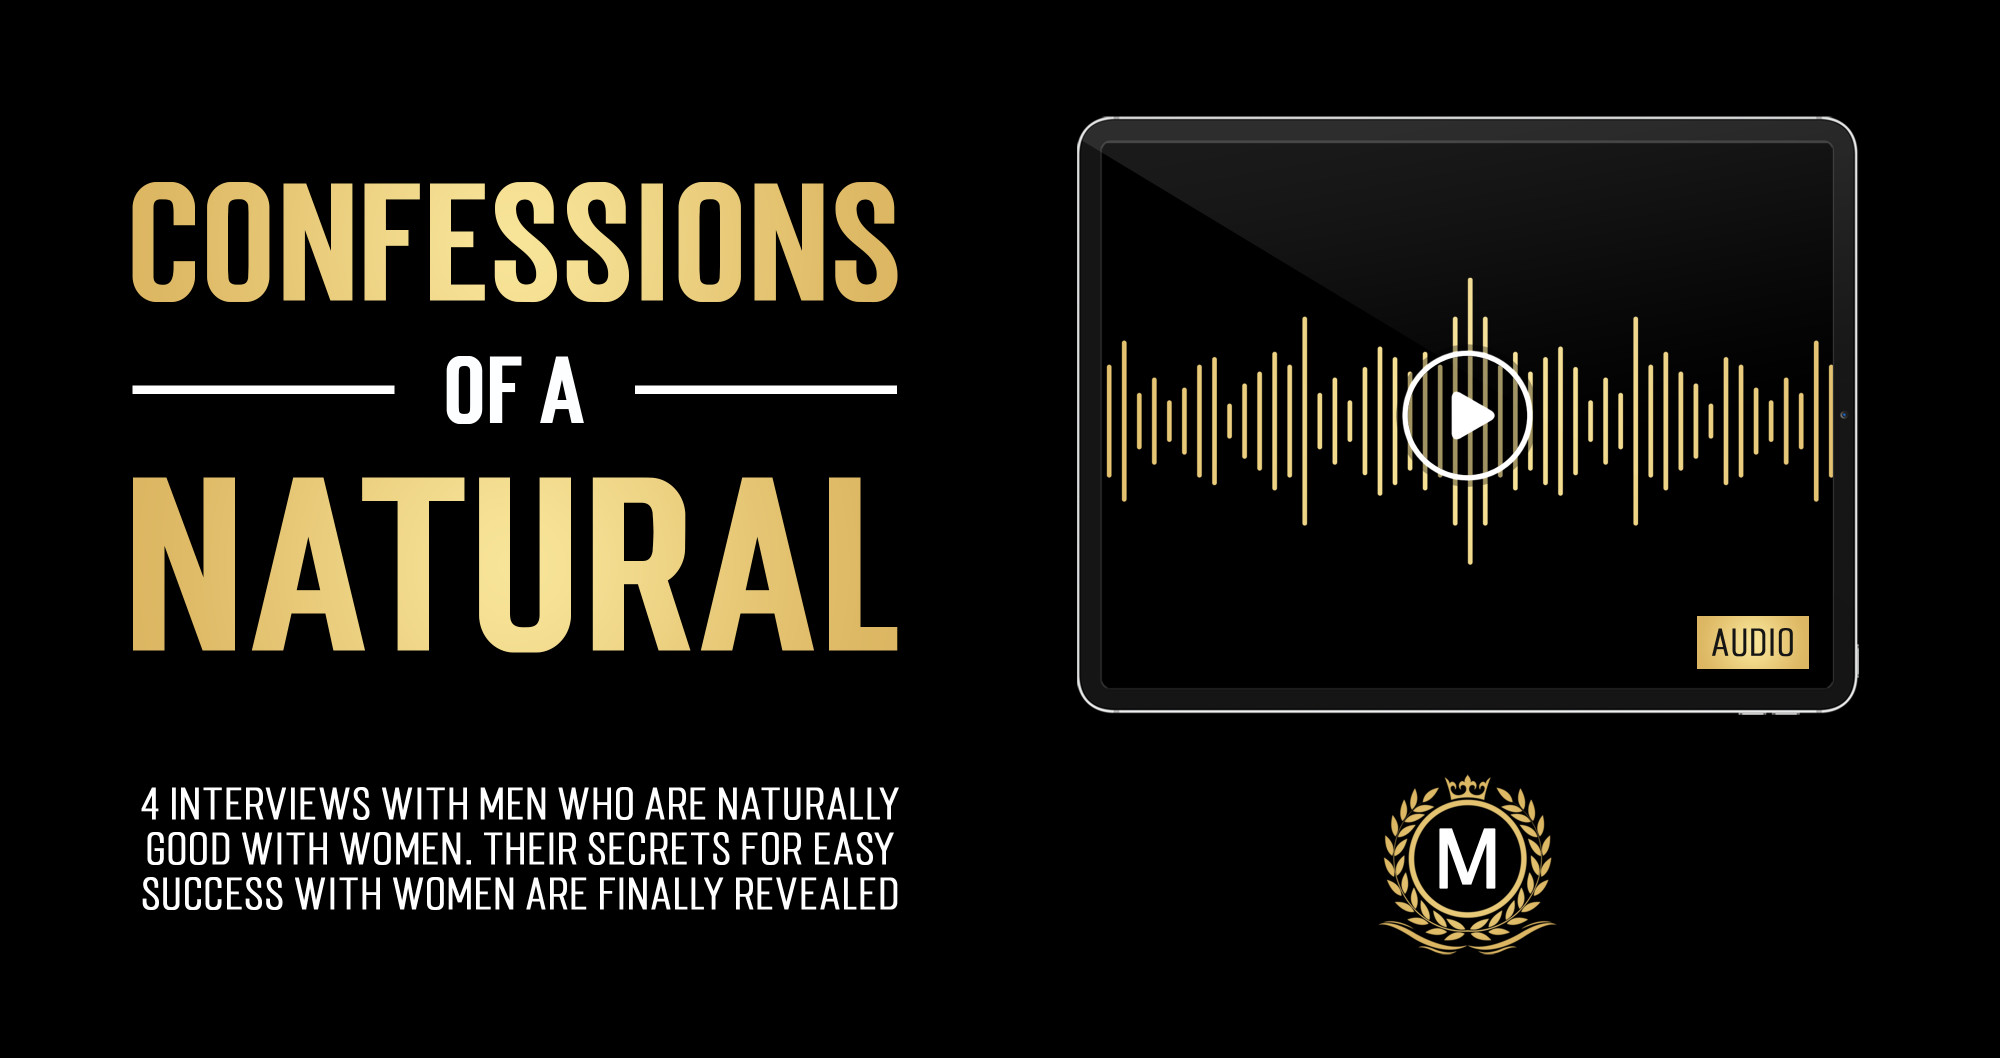 Confessions of a Natural - Interview Series by The Modern Man